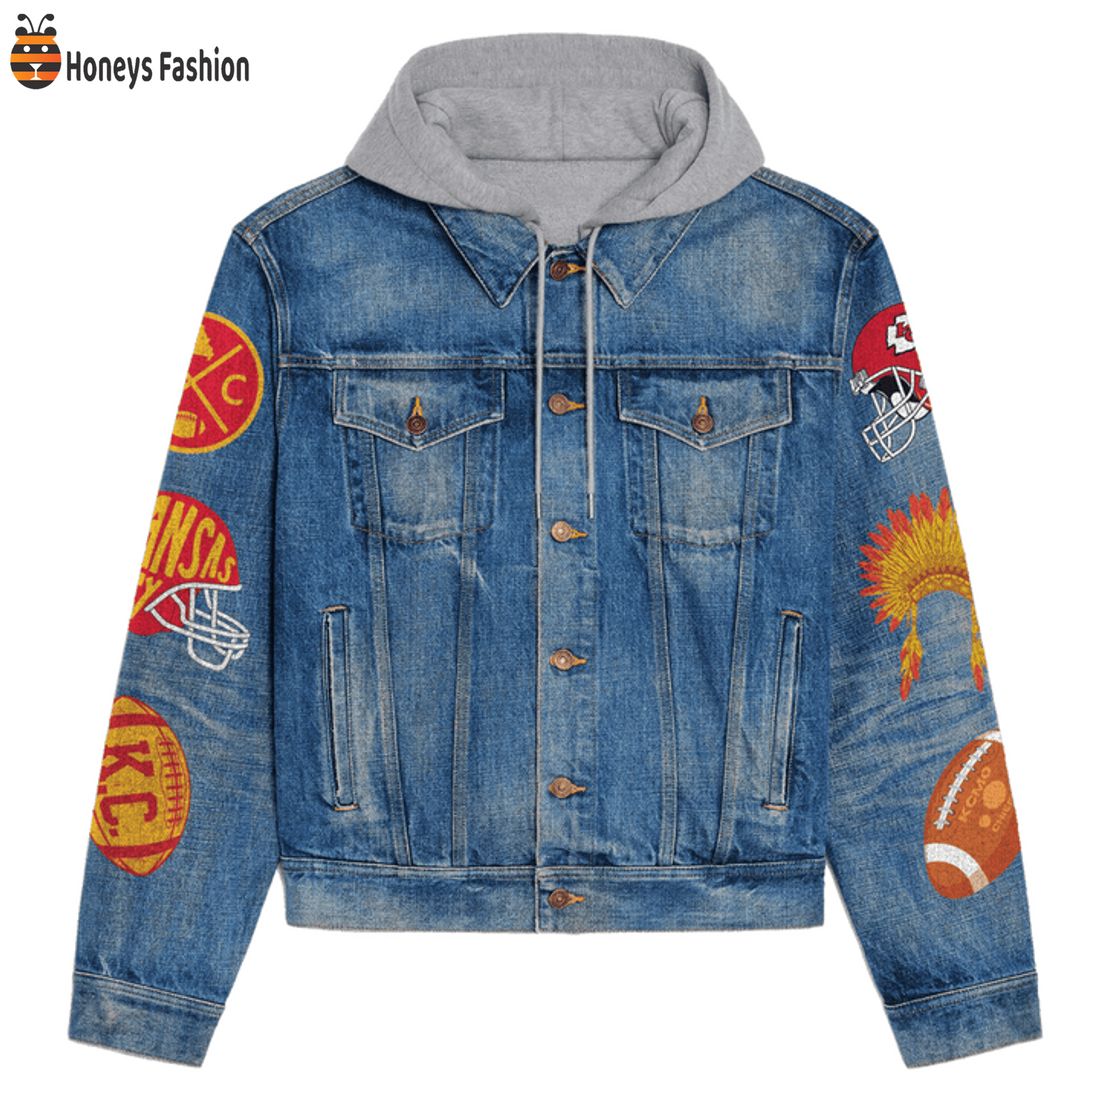 HOT Memphis Grizzlies Grit And Grind Hooded Denim Jacket